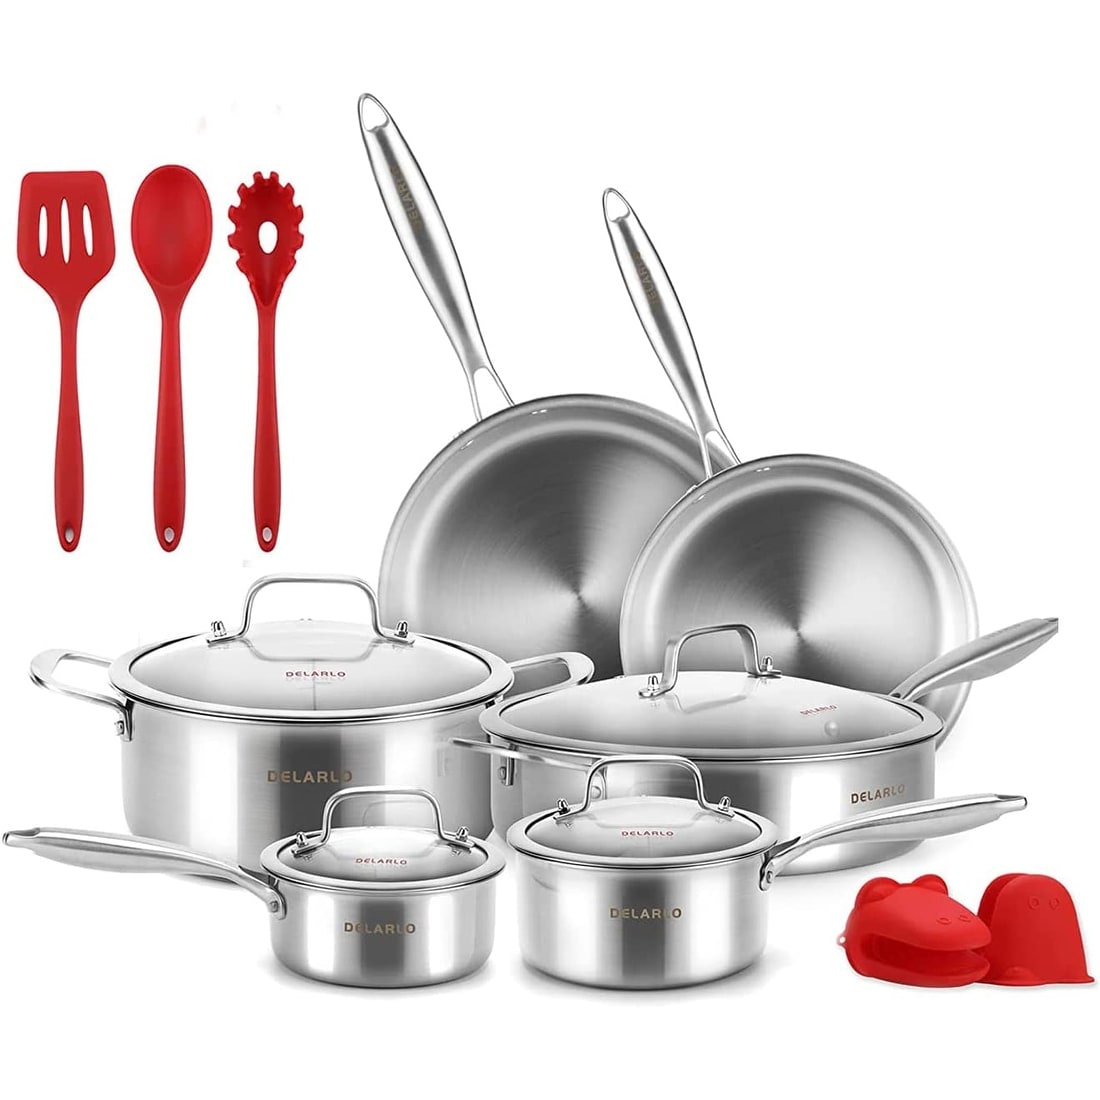 https://ak1.ostkcdn.com/images/products/is/images/direct/aa49cf303ff60facd6a7337f5848eefa74f3c038/Whole-body-Tri-Ply-Stainless-Steel-cookware-sets-kitchen-pots-and-pans-set-7-Piece.jpg